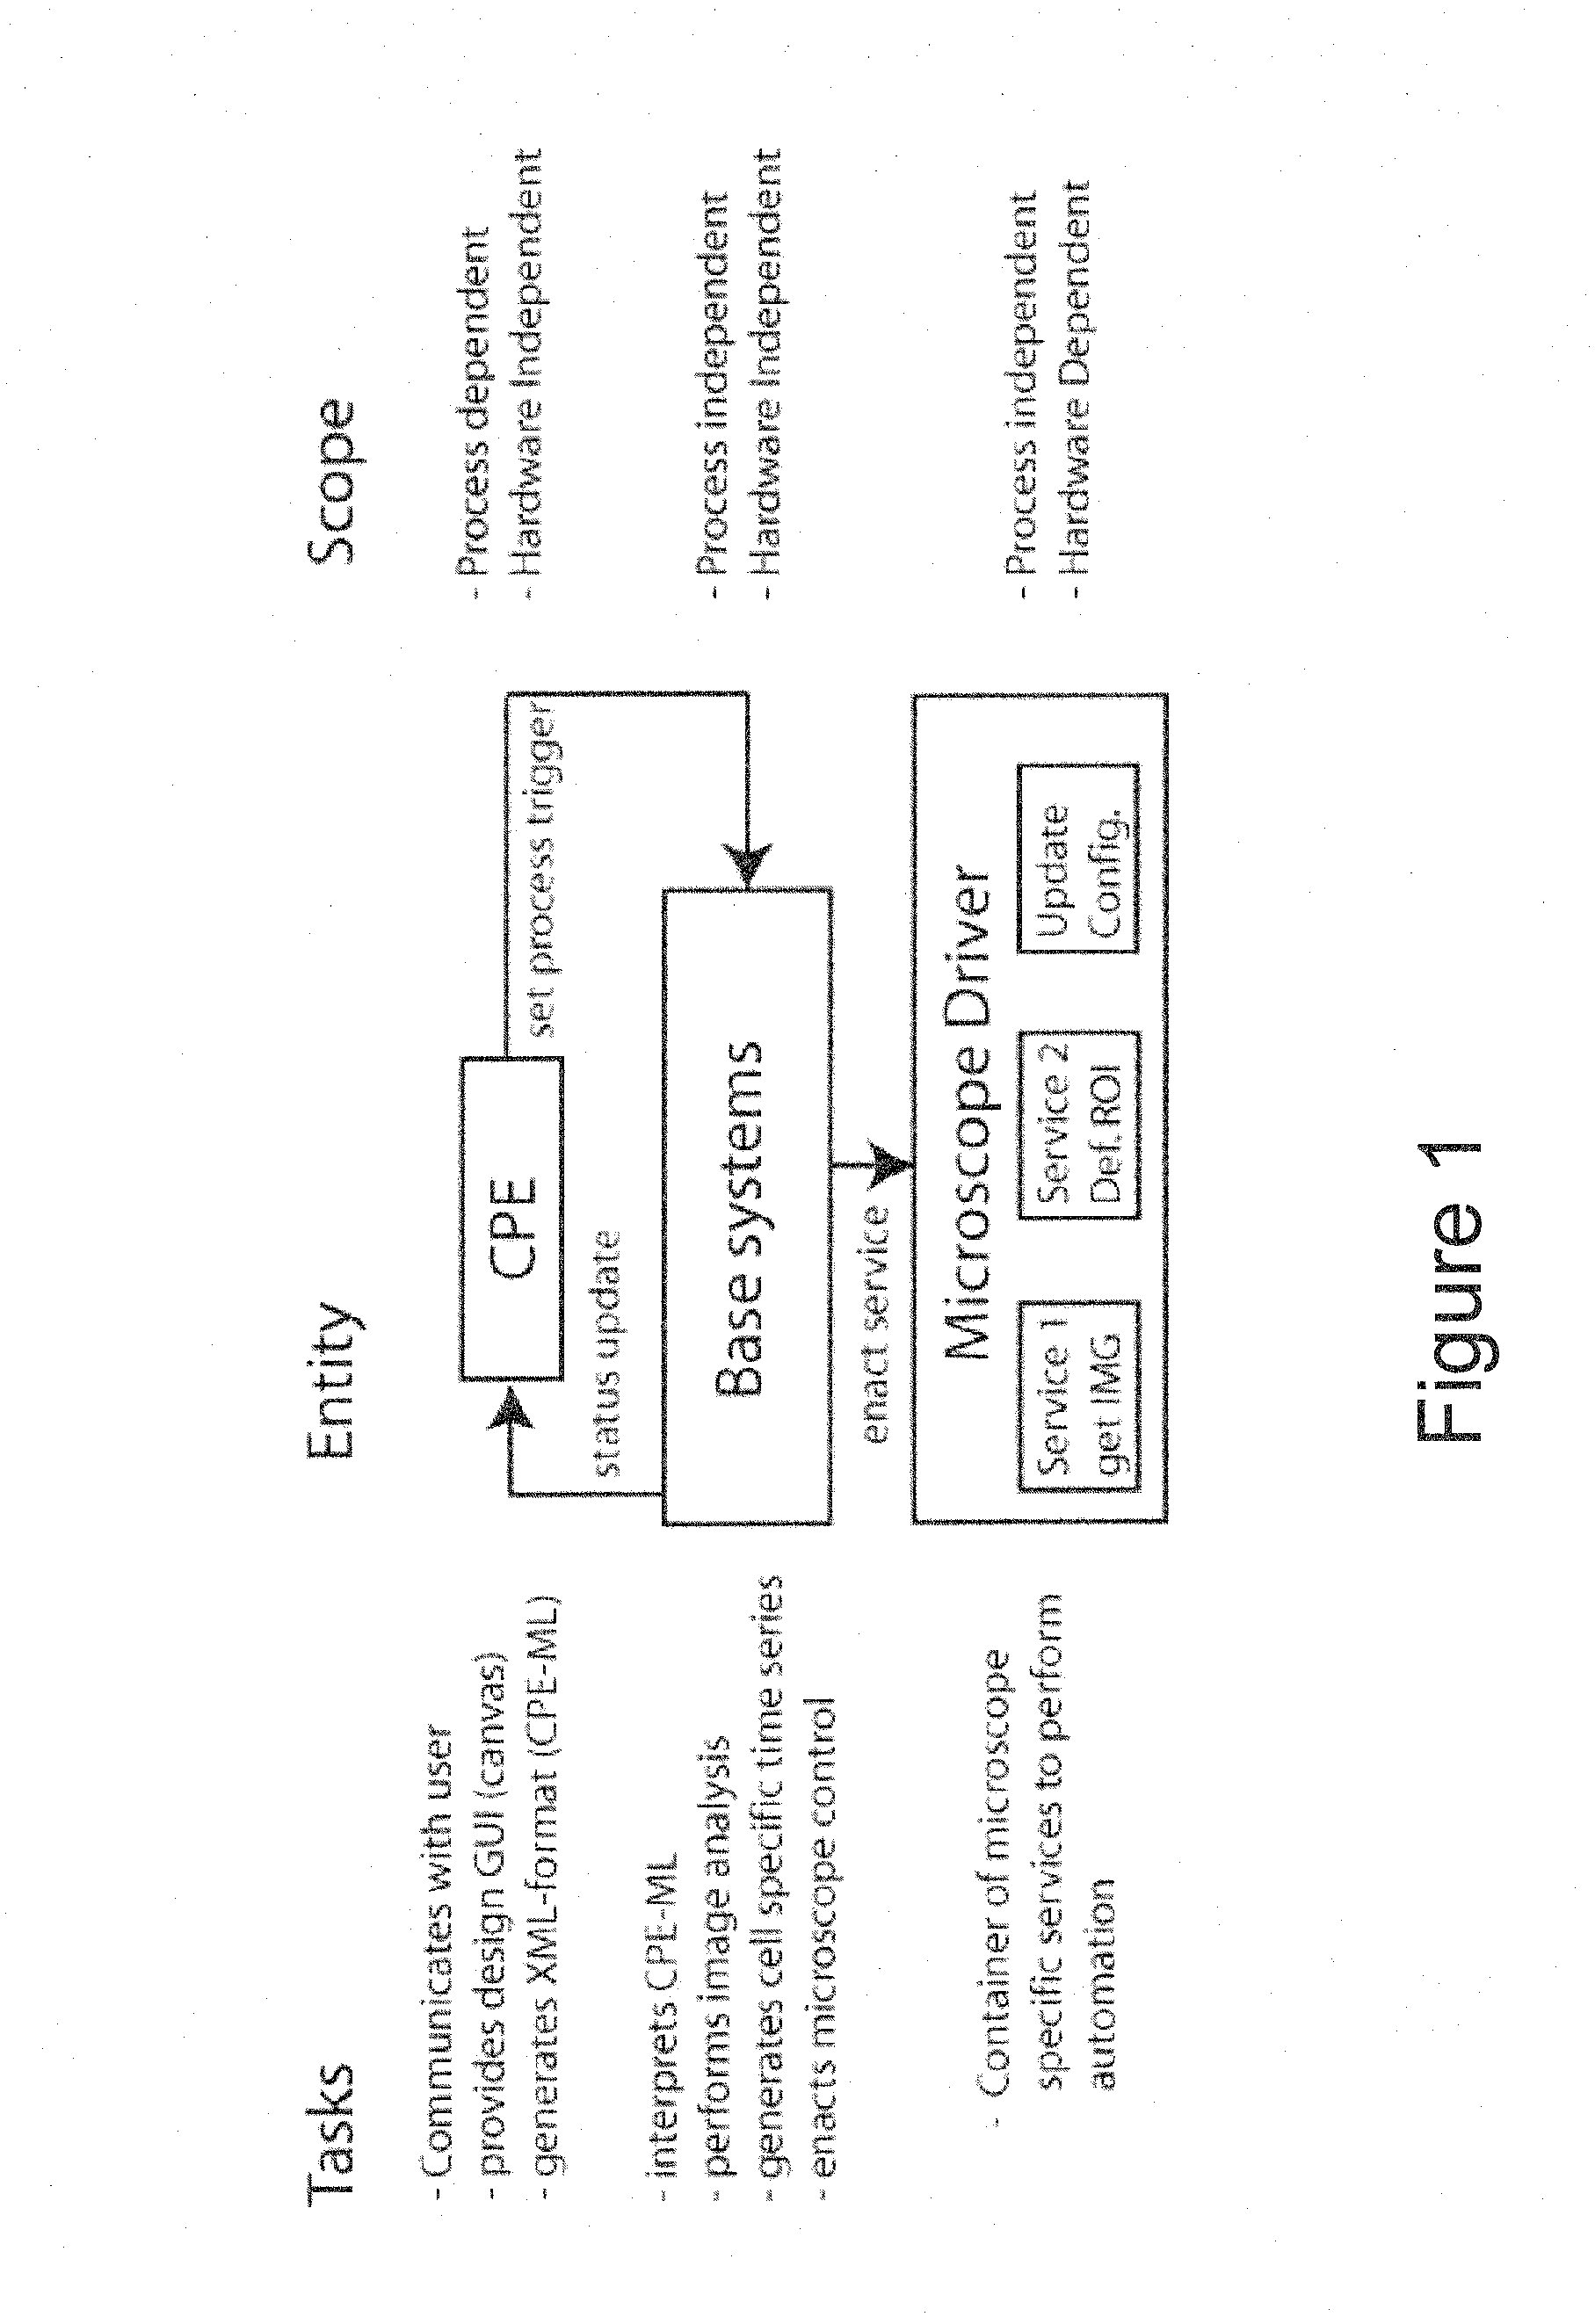 Microscopy control system and method